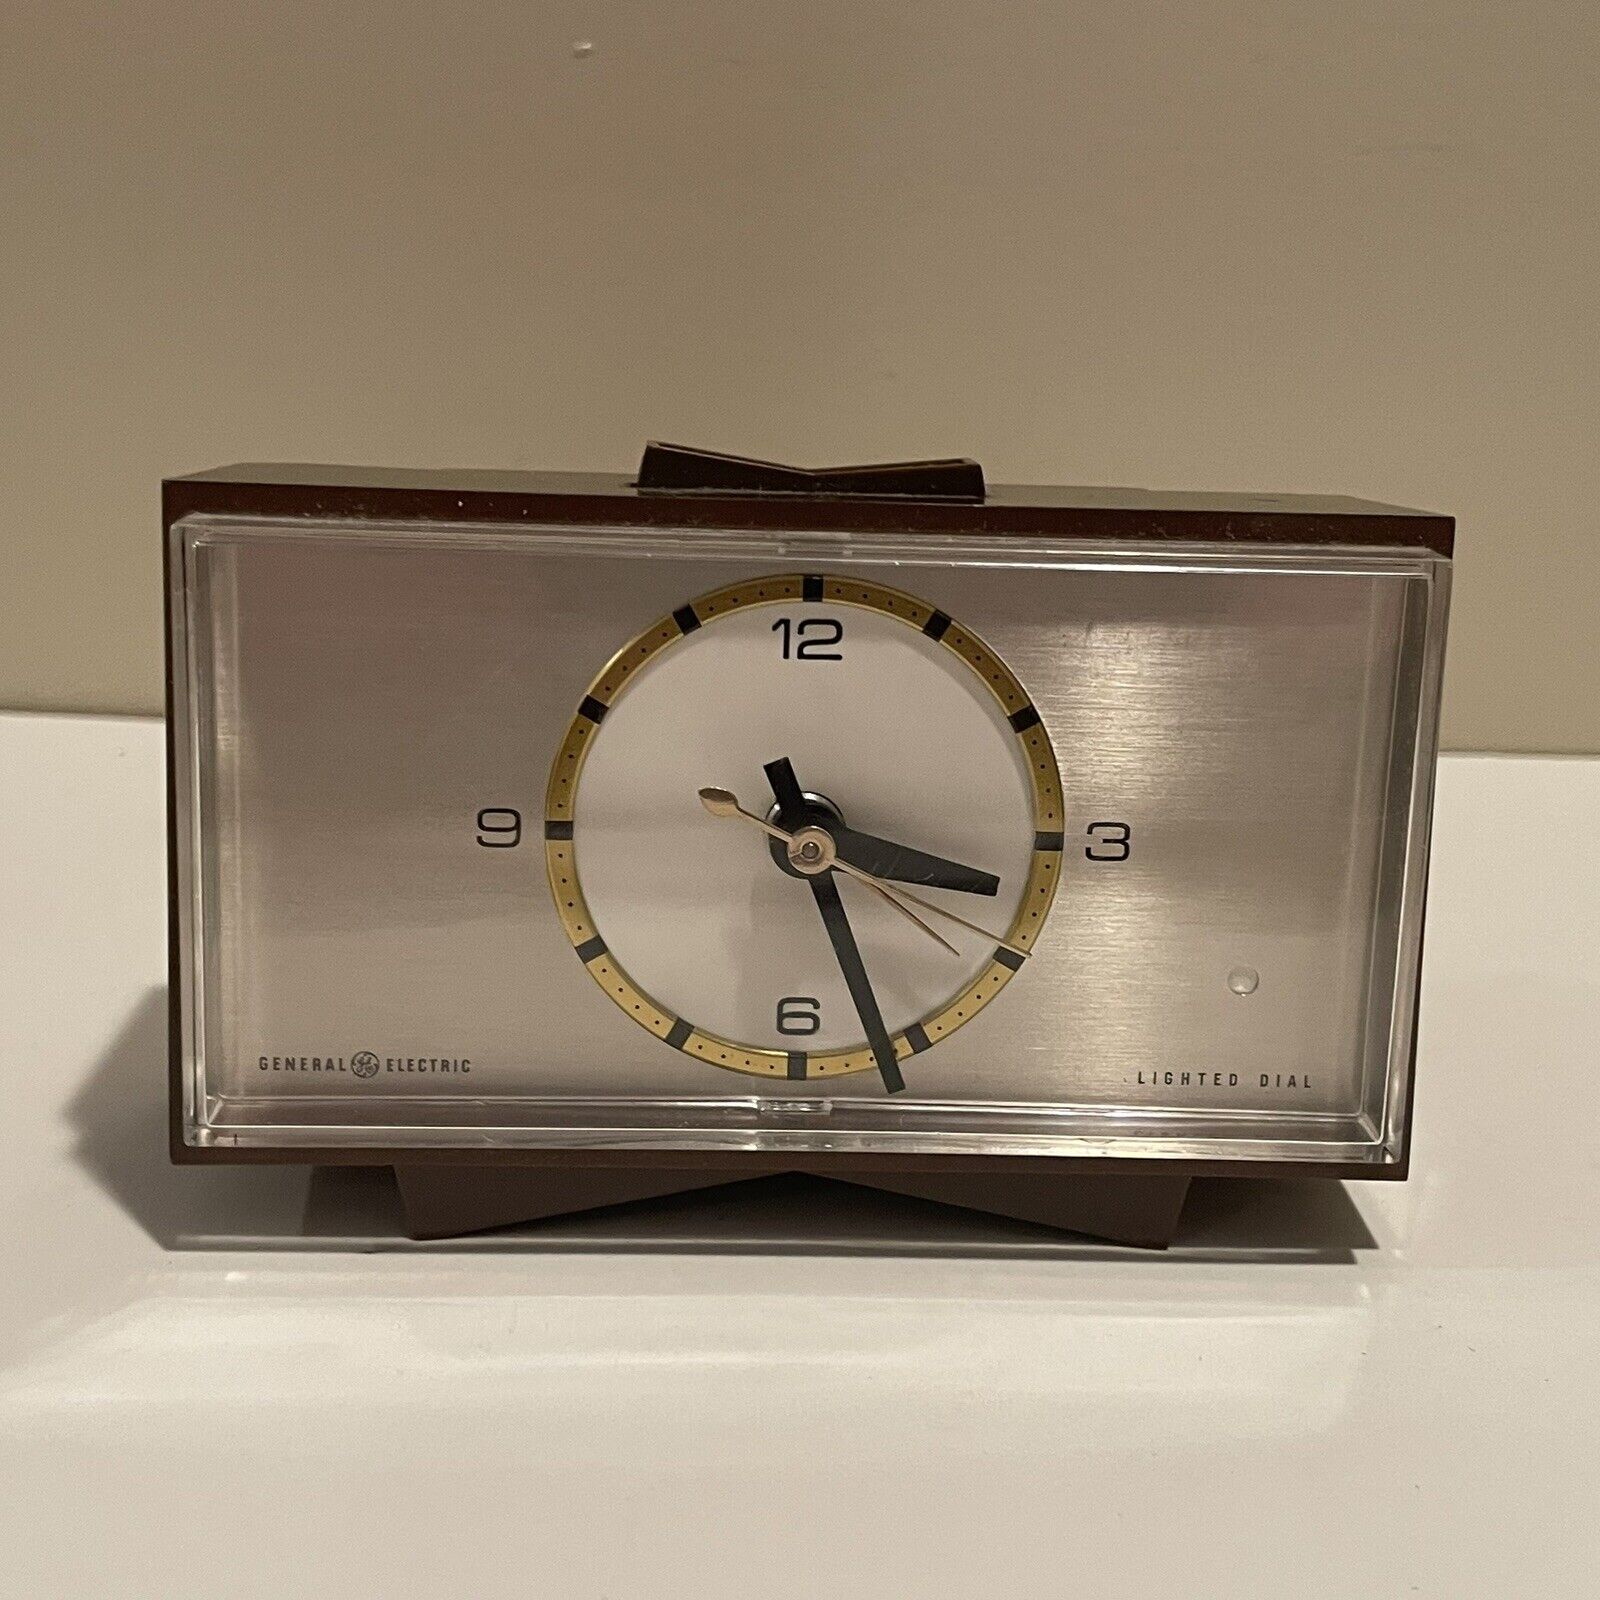 Vintage General Electric Clock model 7349-5. Tested and works